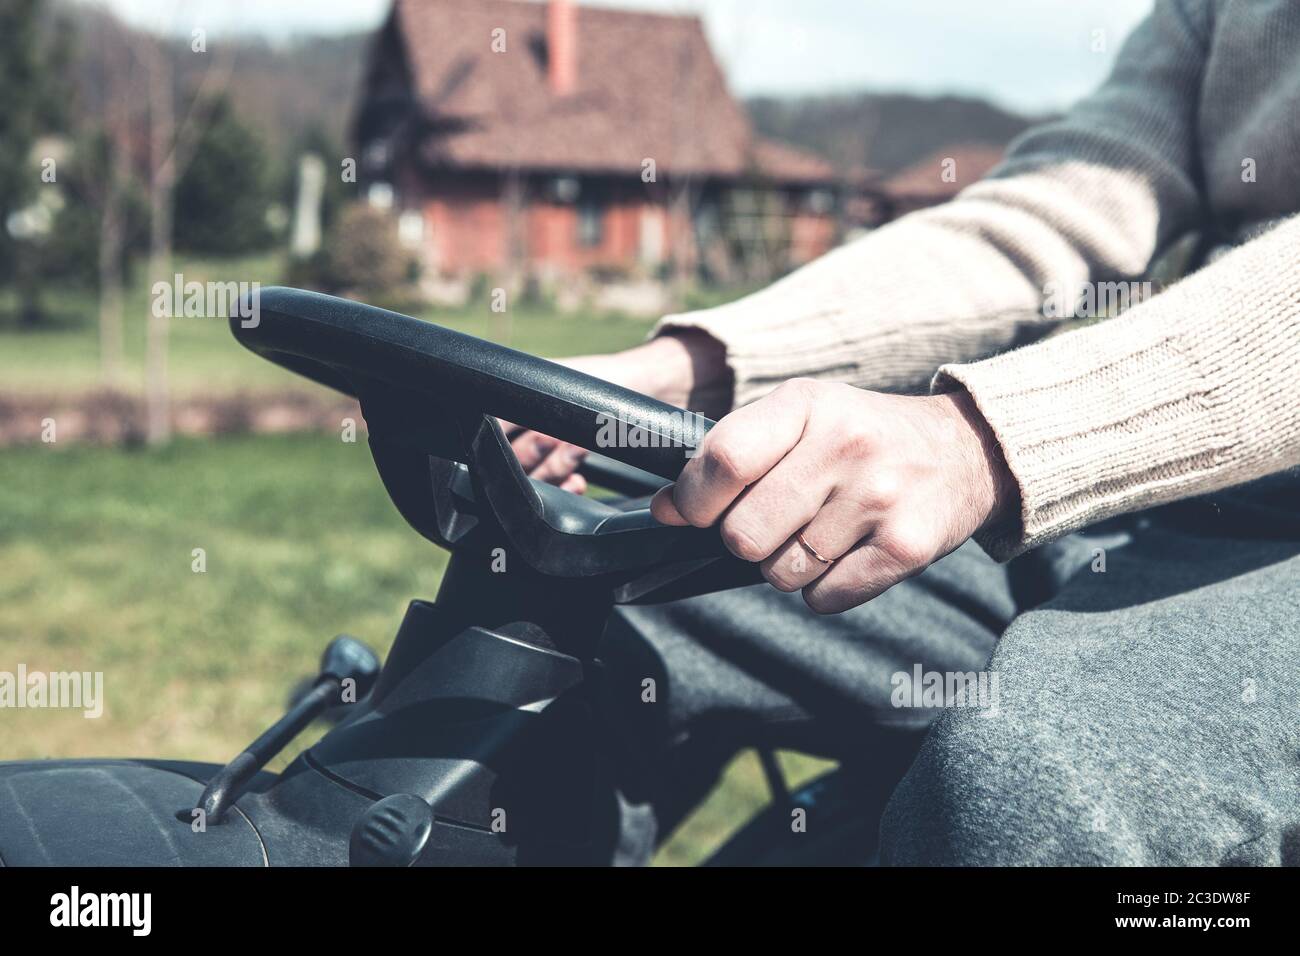 Man working while riding lawn mower on yard Stock Photo